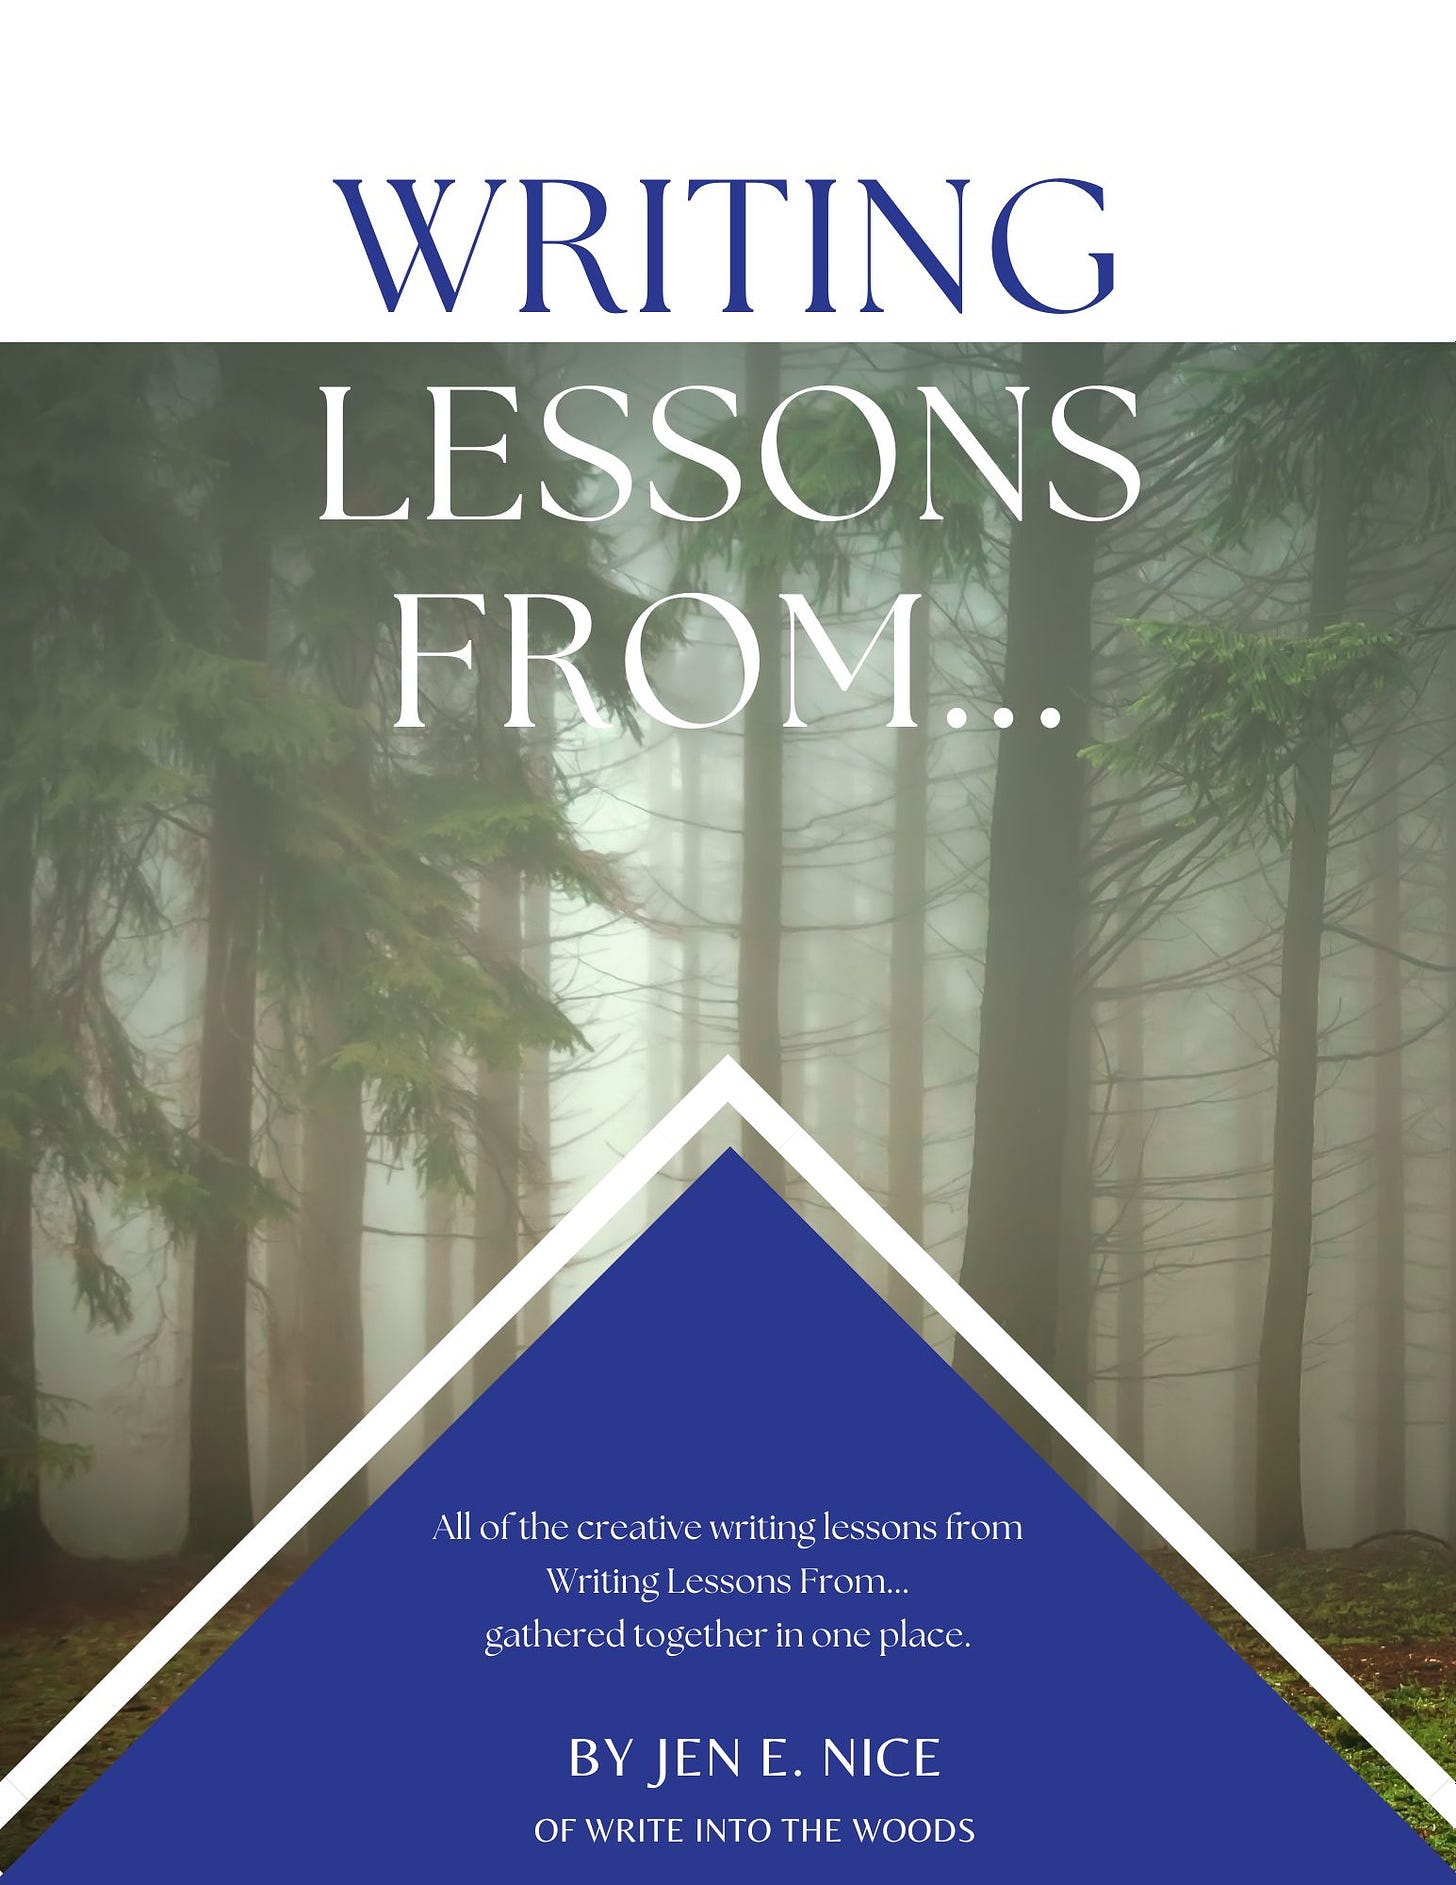 All the Writing Lessons From Writing Lessons From... PDF, download yours by becoming a paid subscriber.